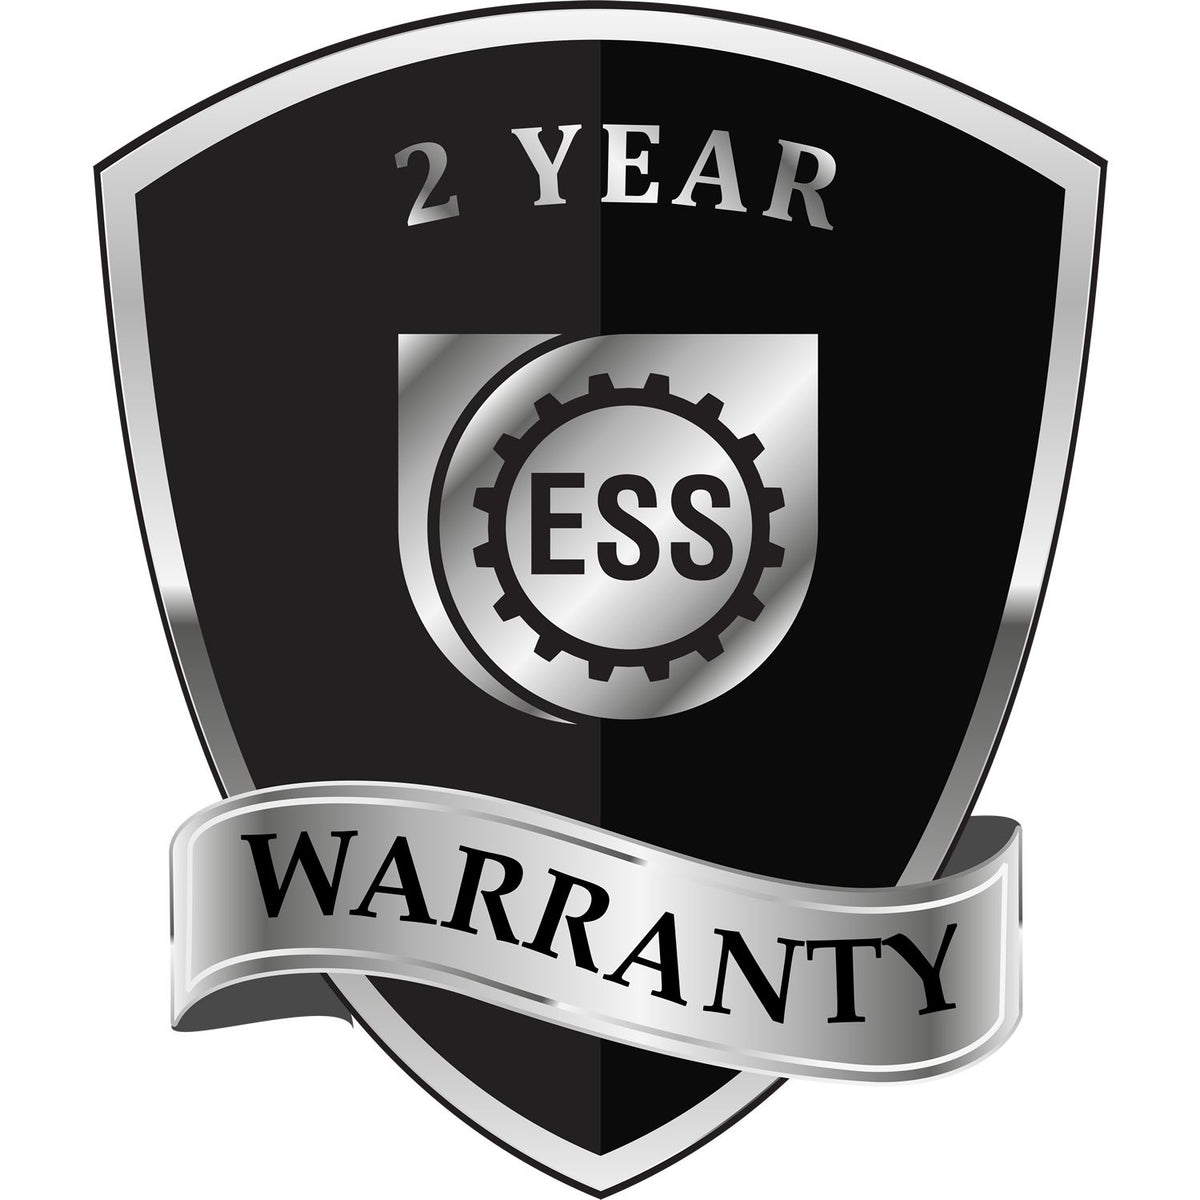 A badge or emblem showing a warranty icon for the Washington Desk Architect Embossing Seal